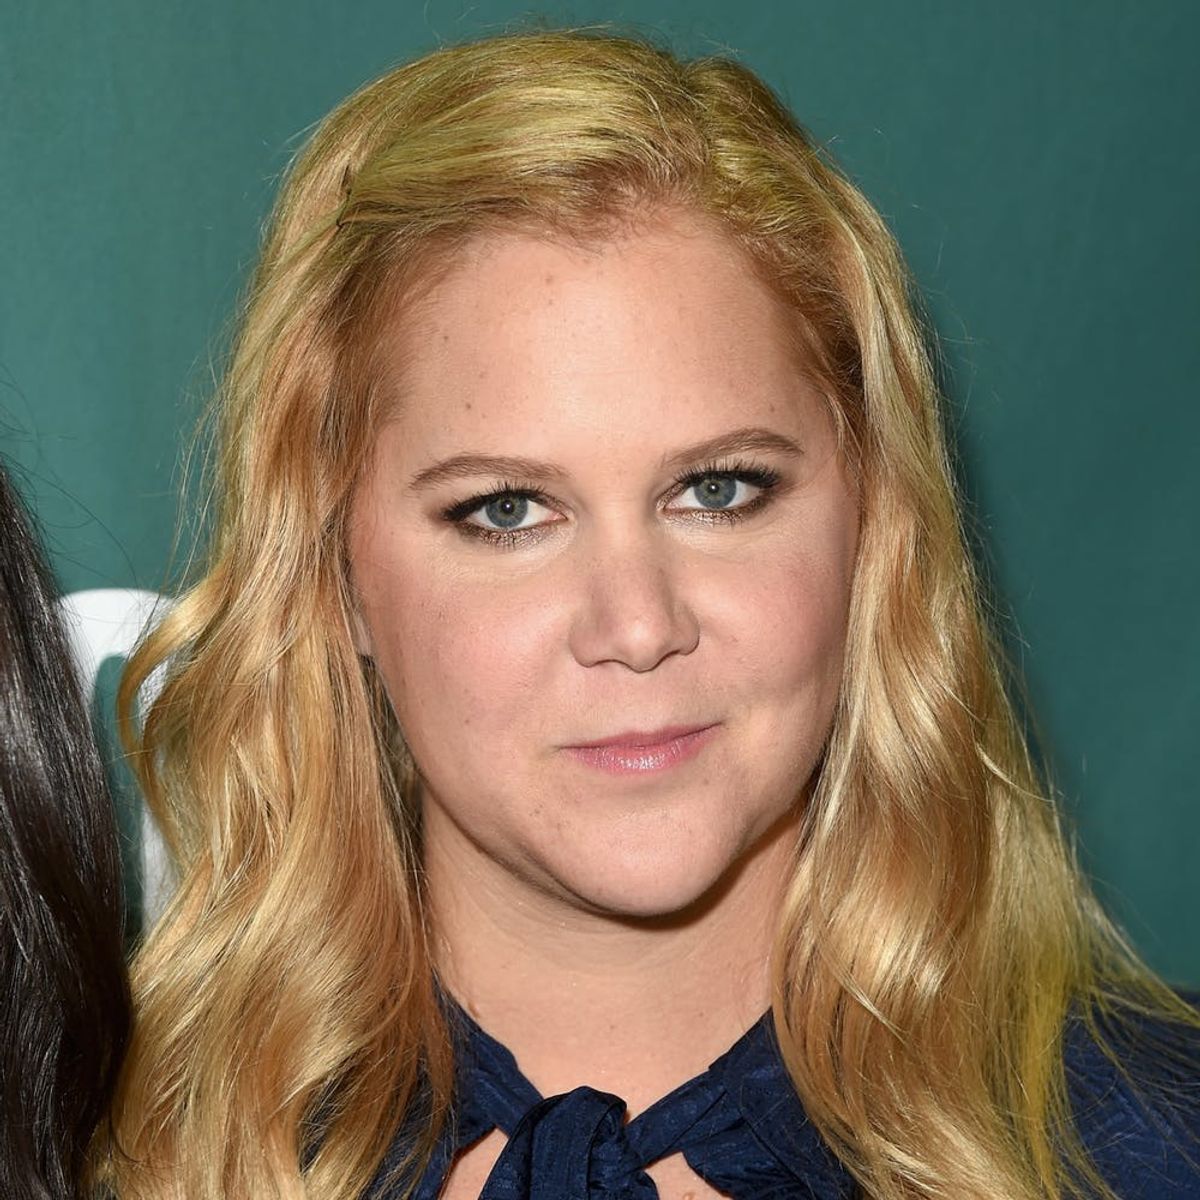 Amy Schumer Just Called Out a Sexist Audience Member in the Best Way Possible